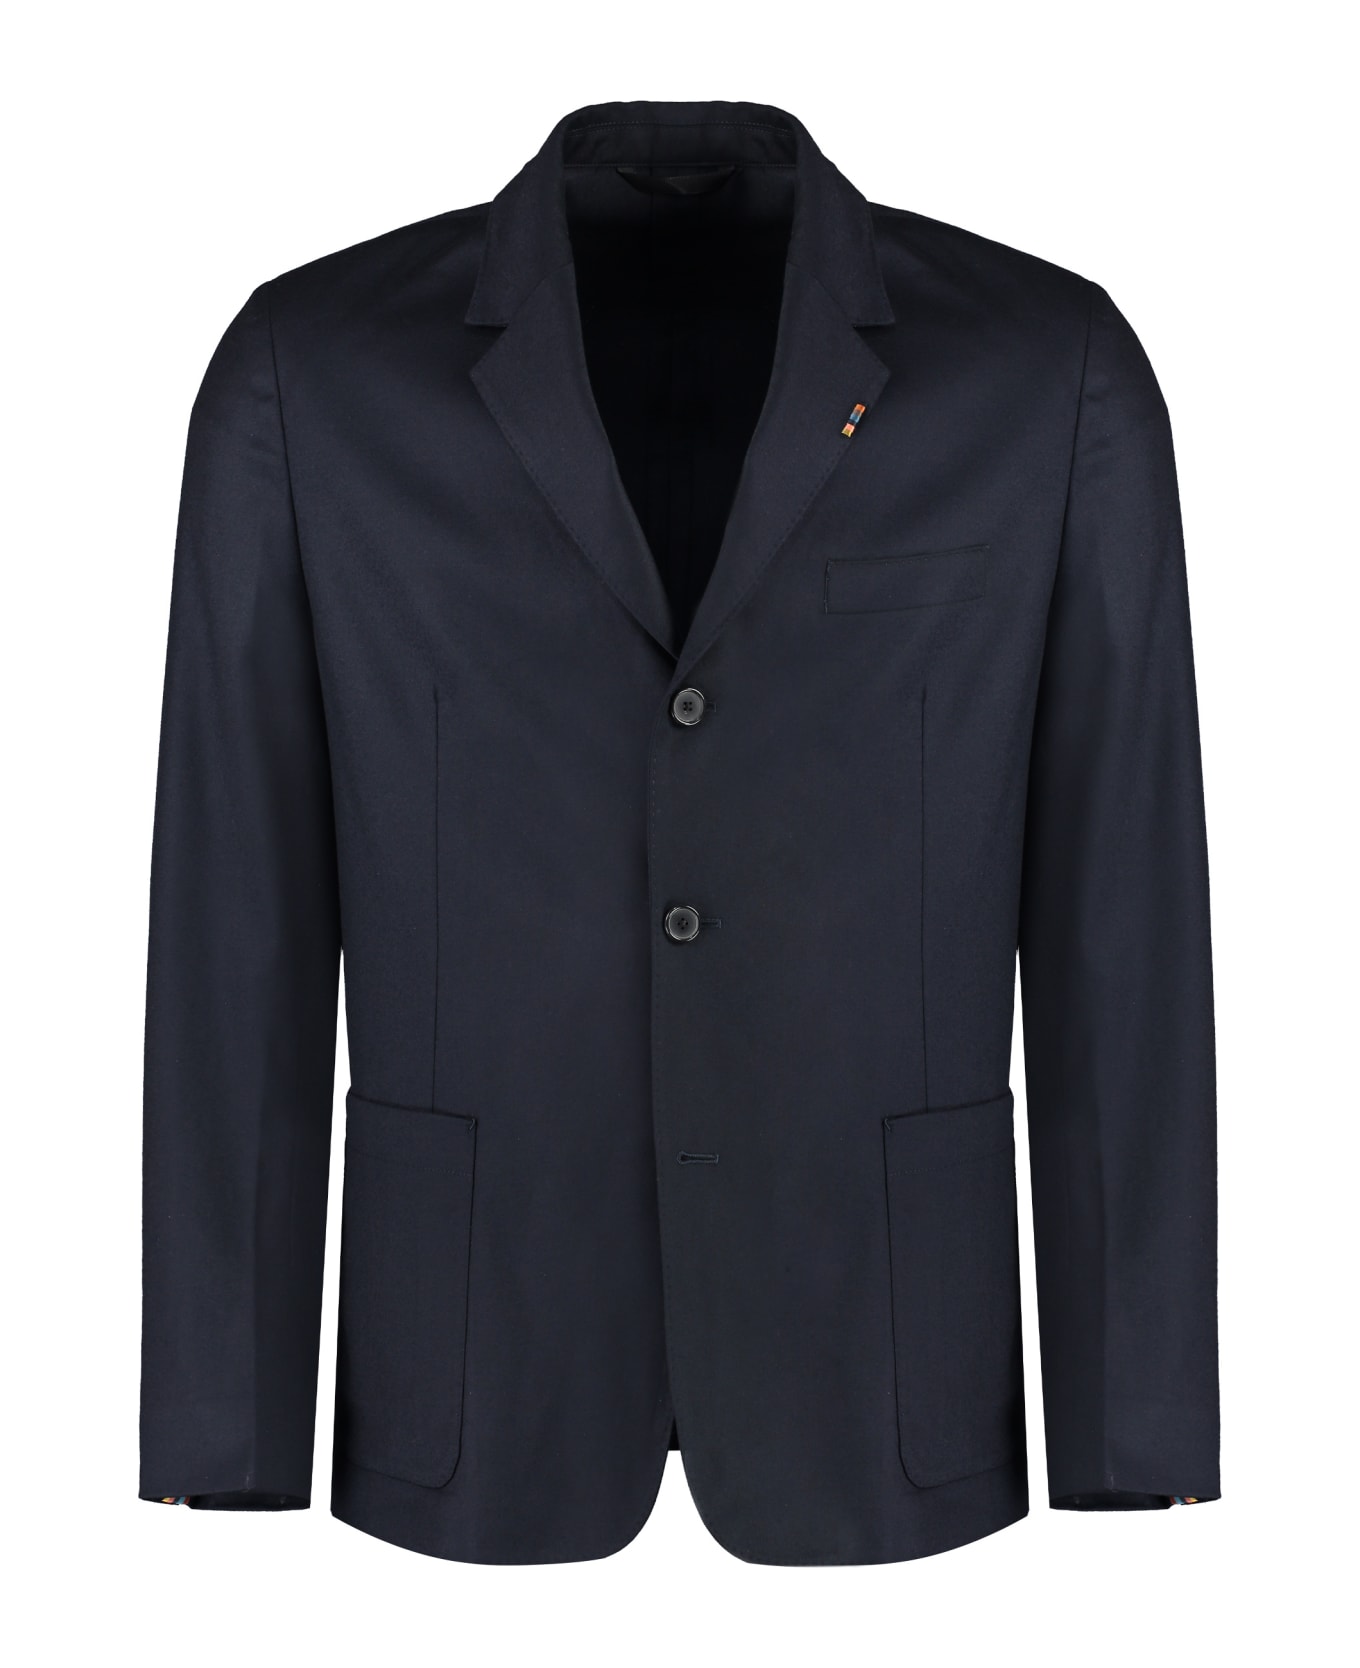 Paul Smith Wool-cashmere Blend Two-button Blazer - blue ブレザー